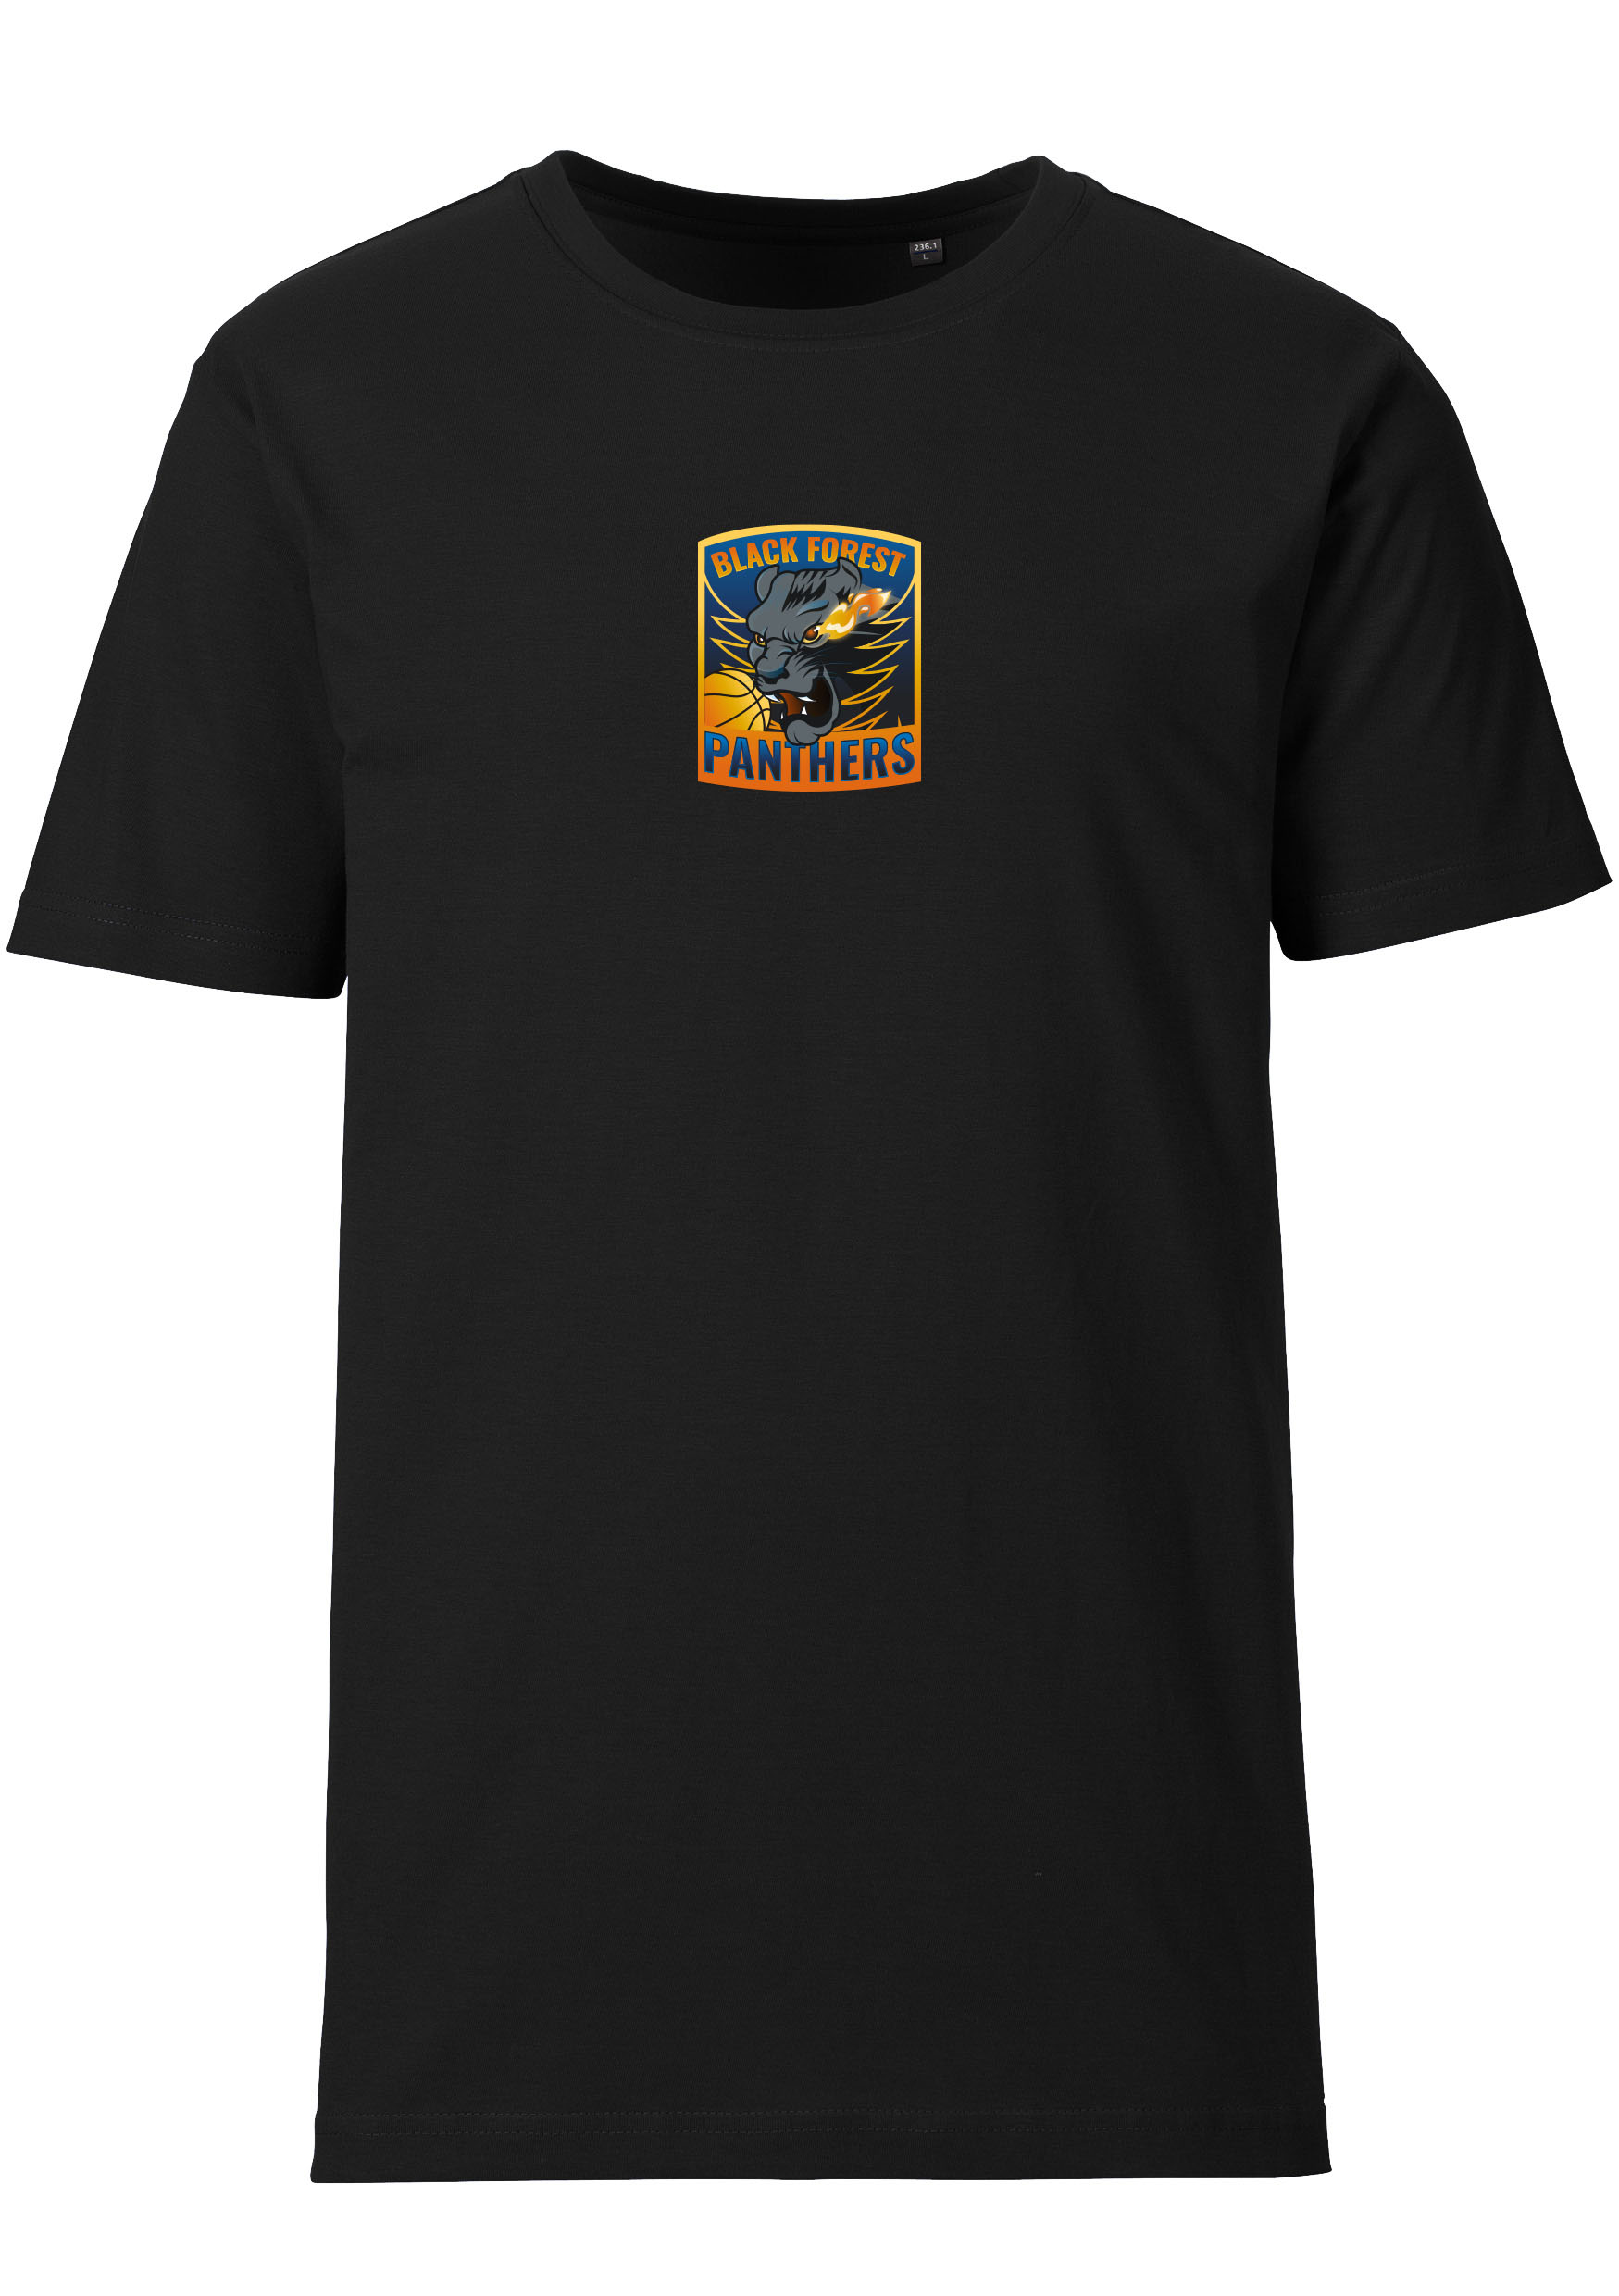 Black Forest Panthers T Shirt